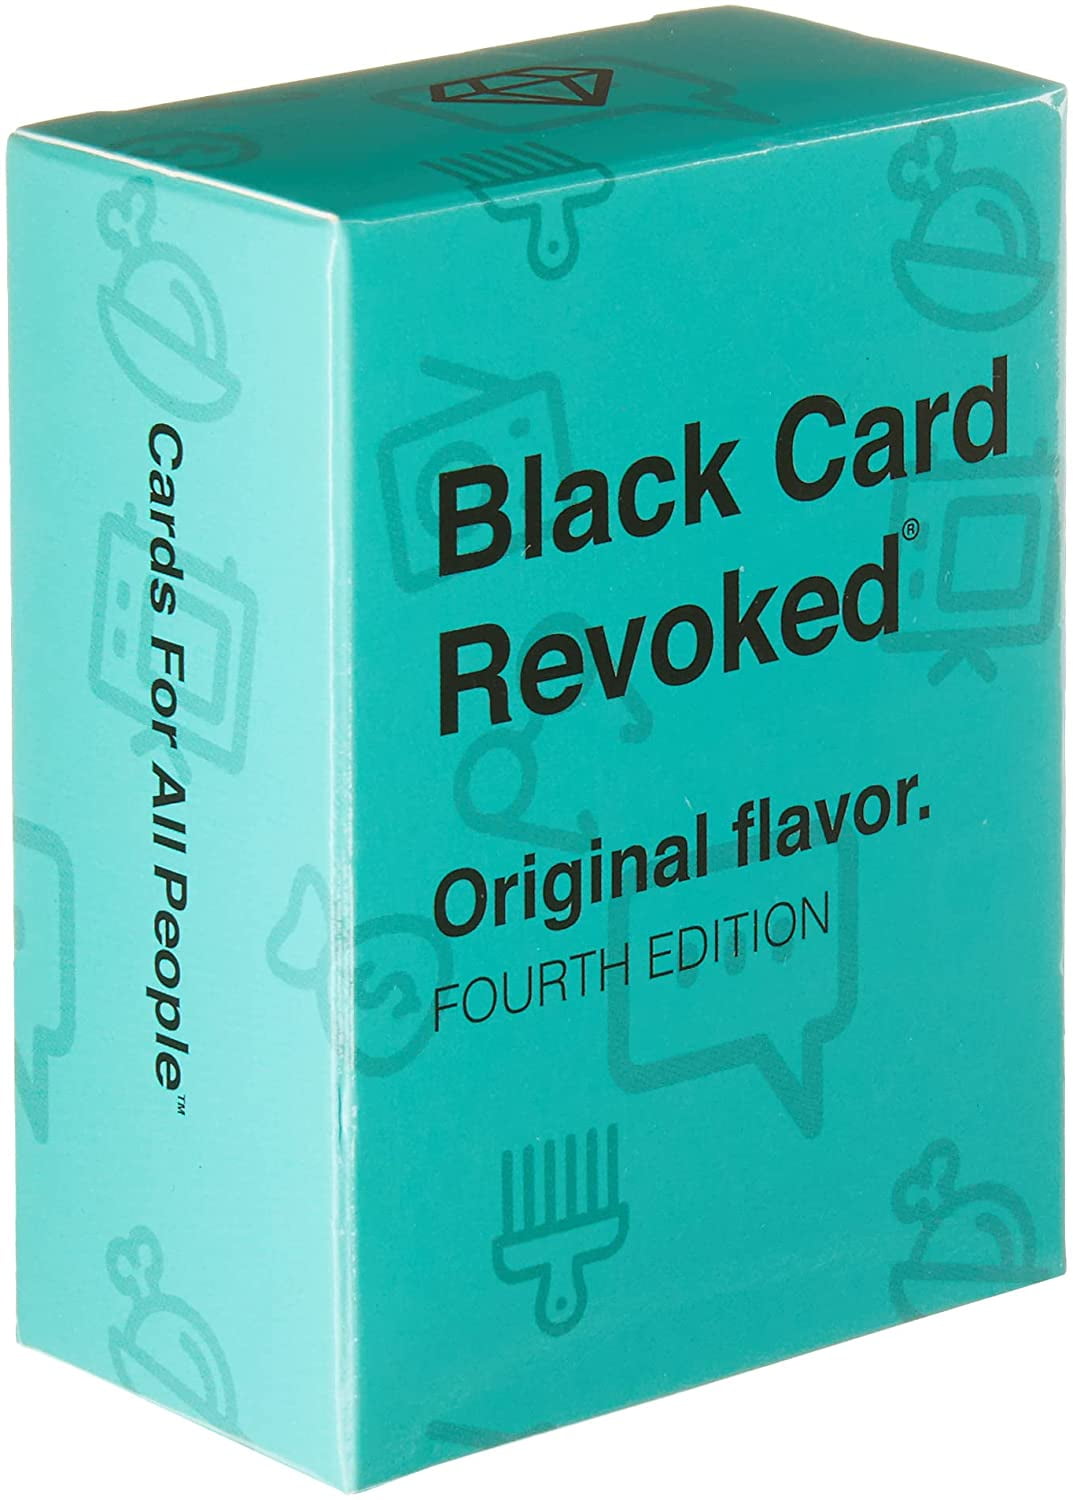 Black Card Revoked – Cards For All People